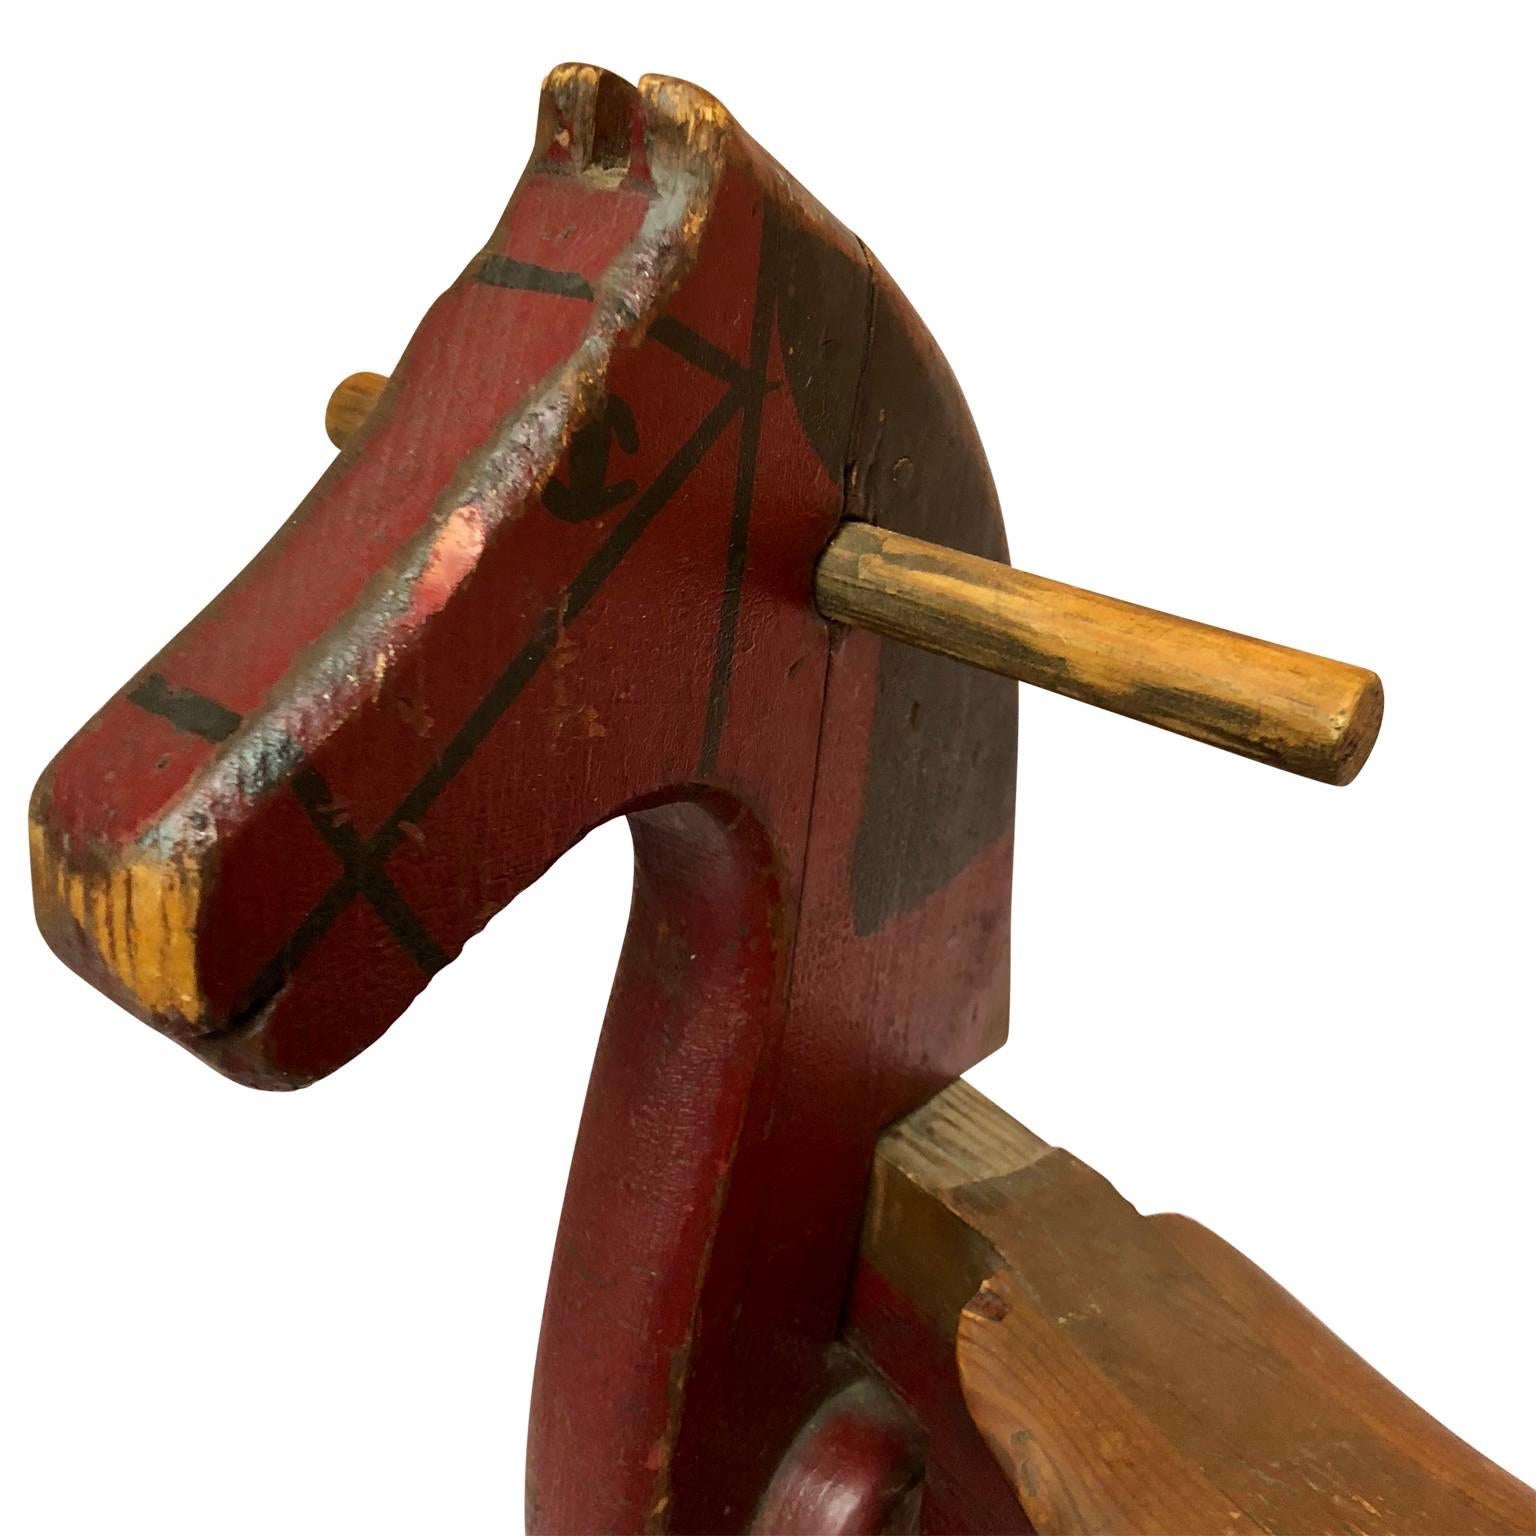 Antique Children’s tricycle horse of red painted wood

$125 flat rate front door delivery includes Washington DC metro, Baltimore and Philadelphia